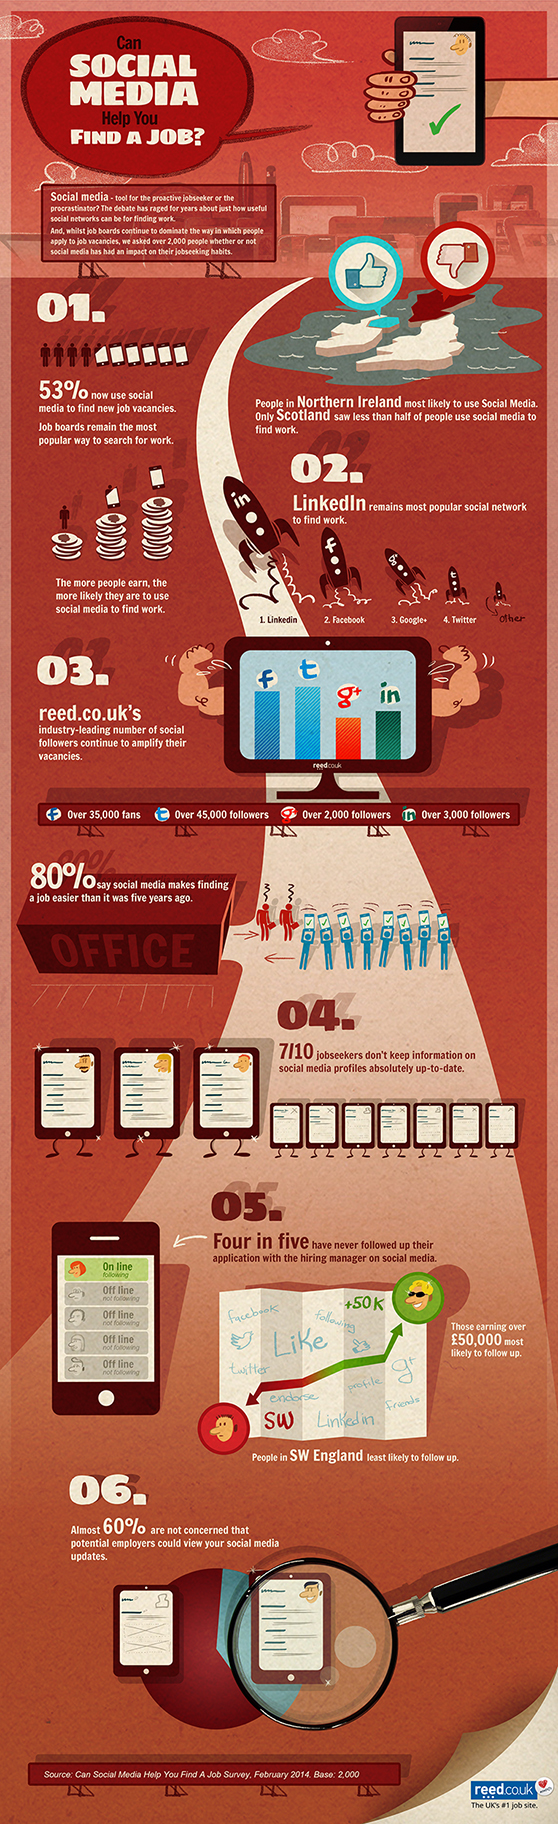 INFOGRAPHIC: How jobseekers use social networks to find work